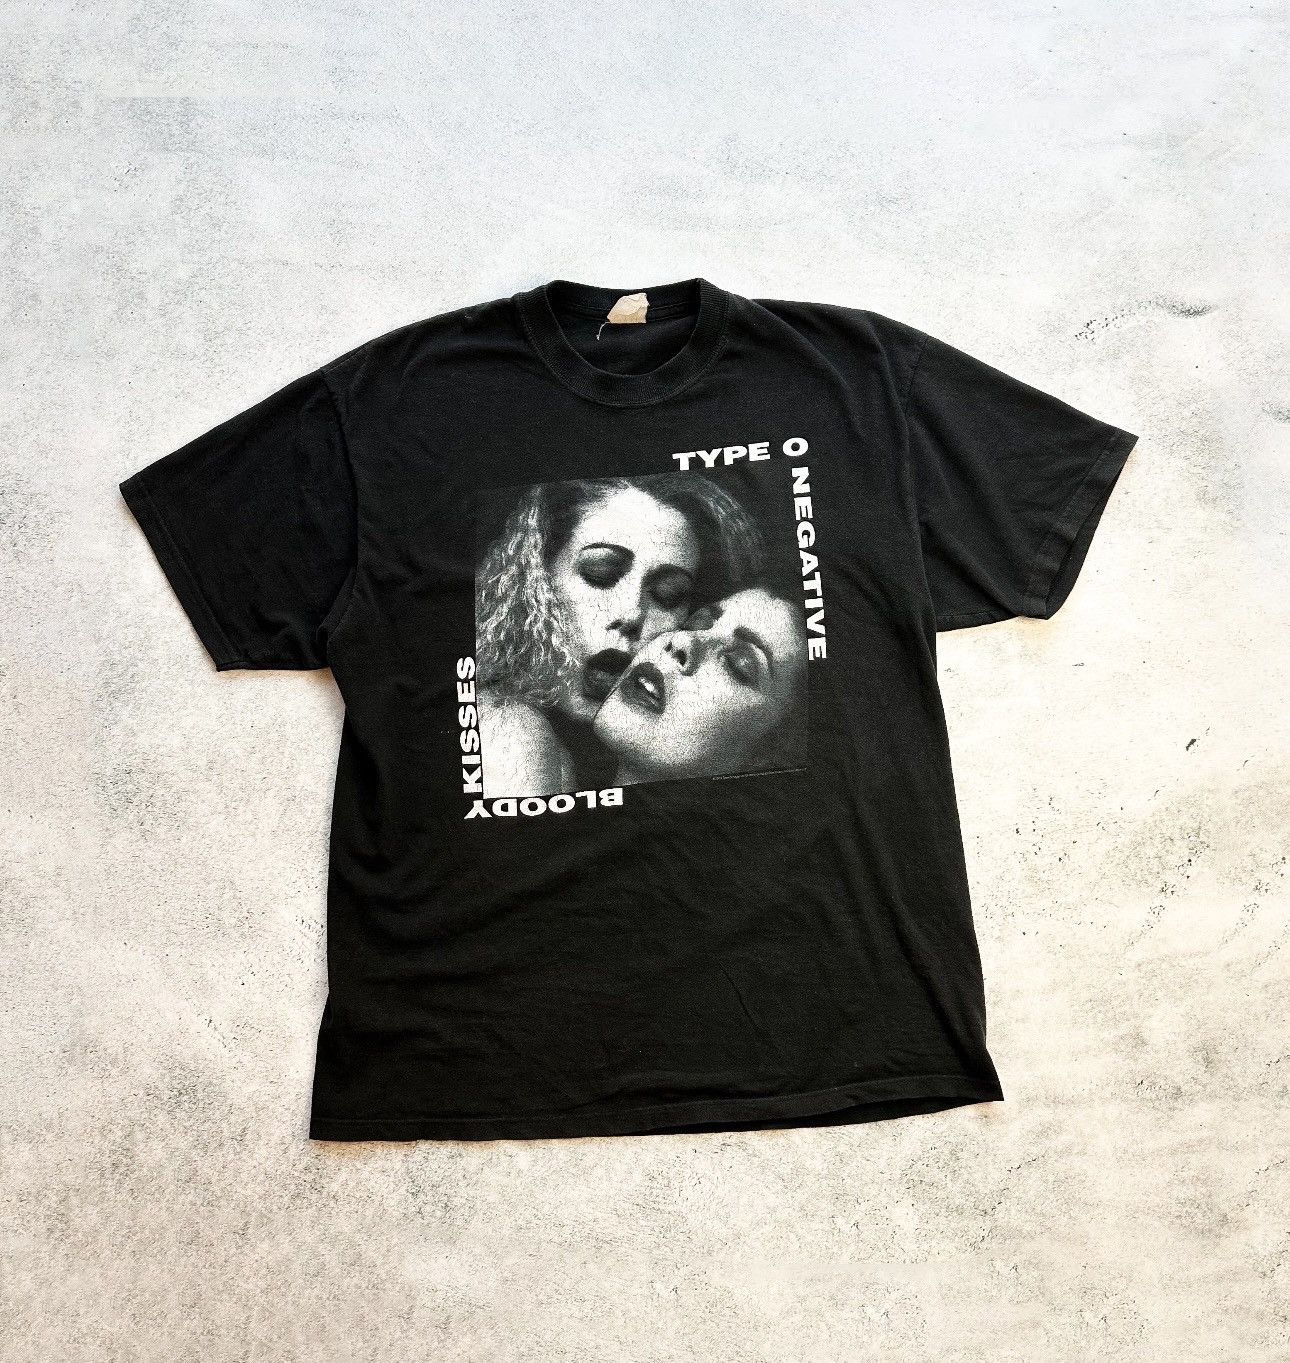 Pre-owned Band Tees X Vintage Type O Negative 2003 “bloody Kisses” T-shirt In Black